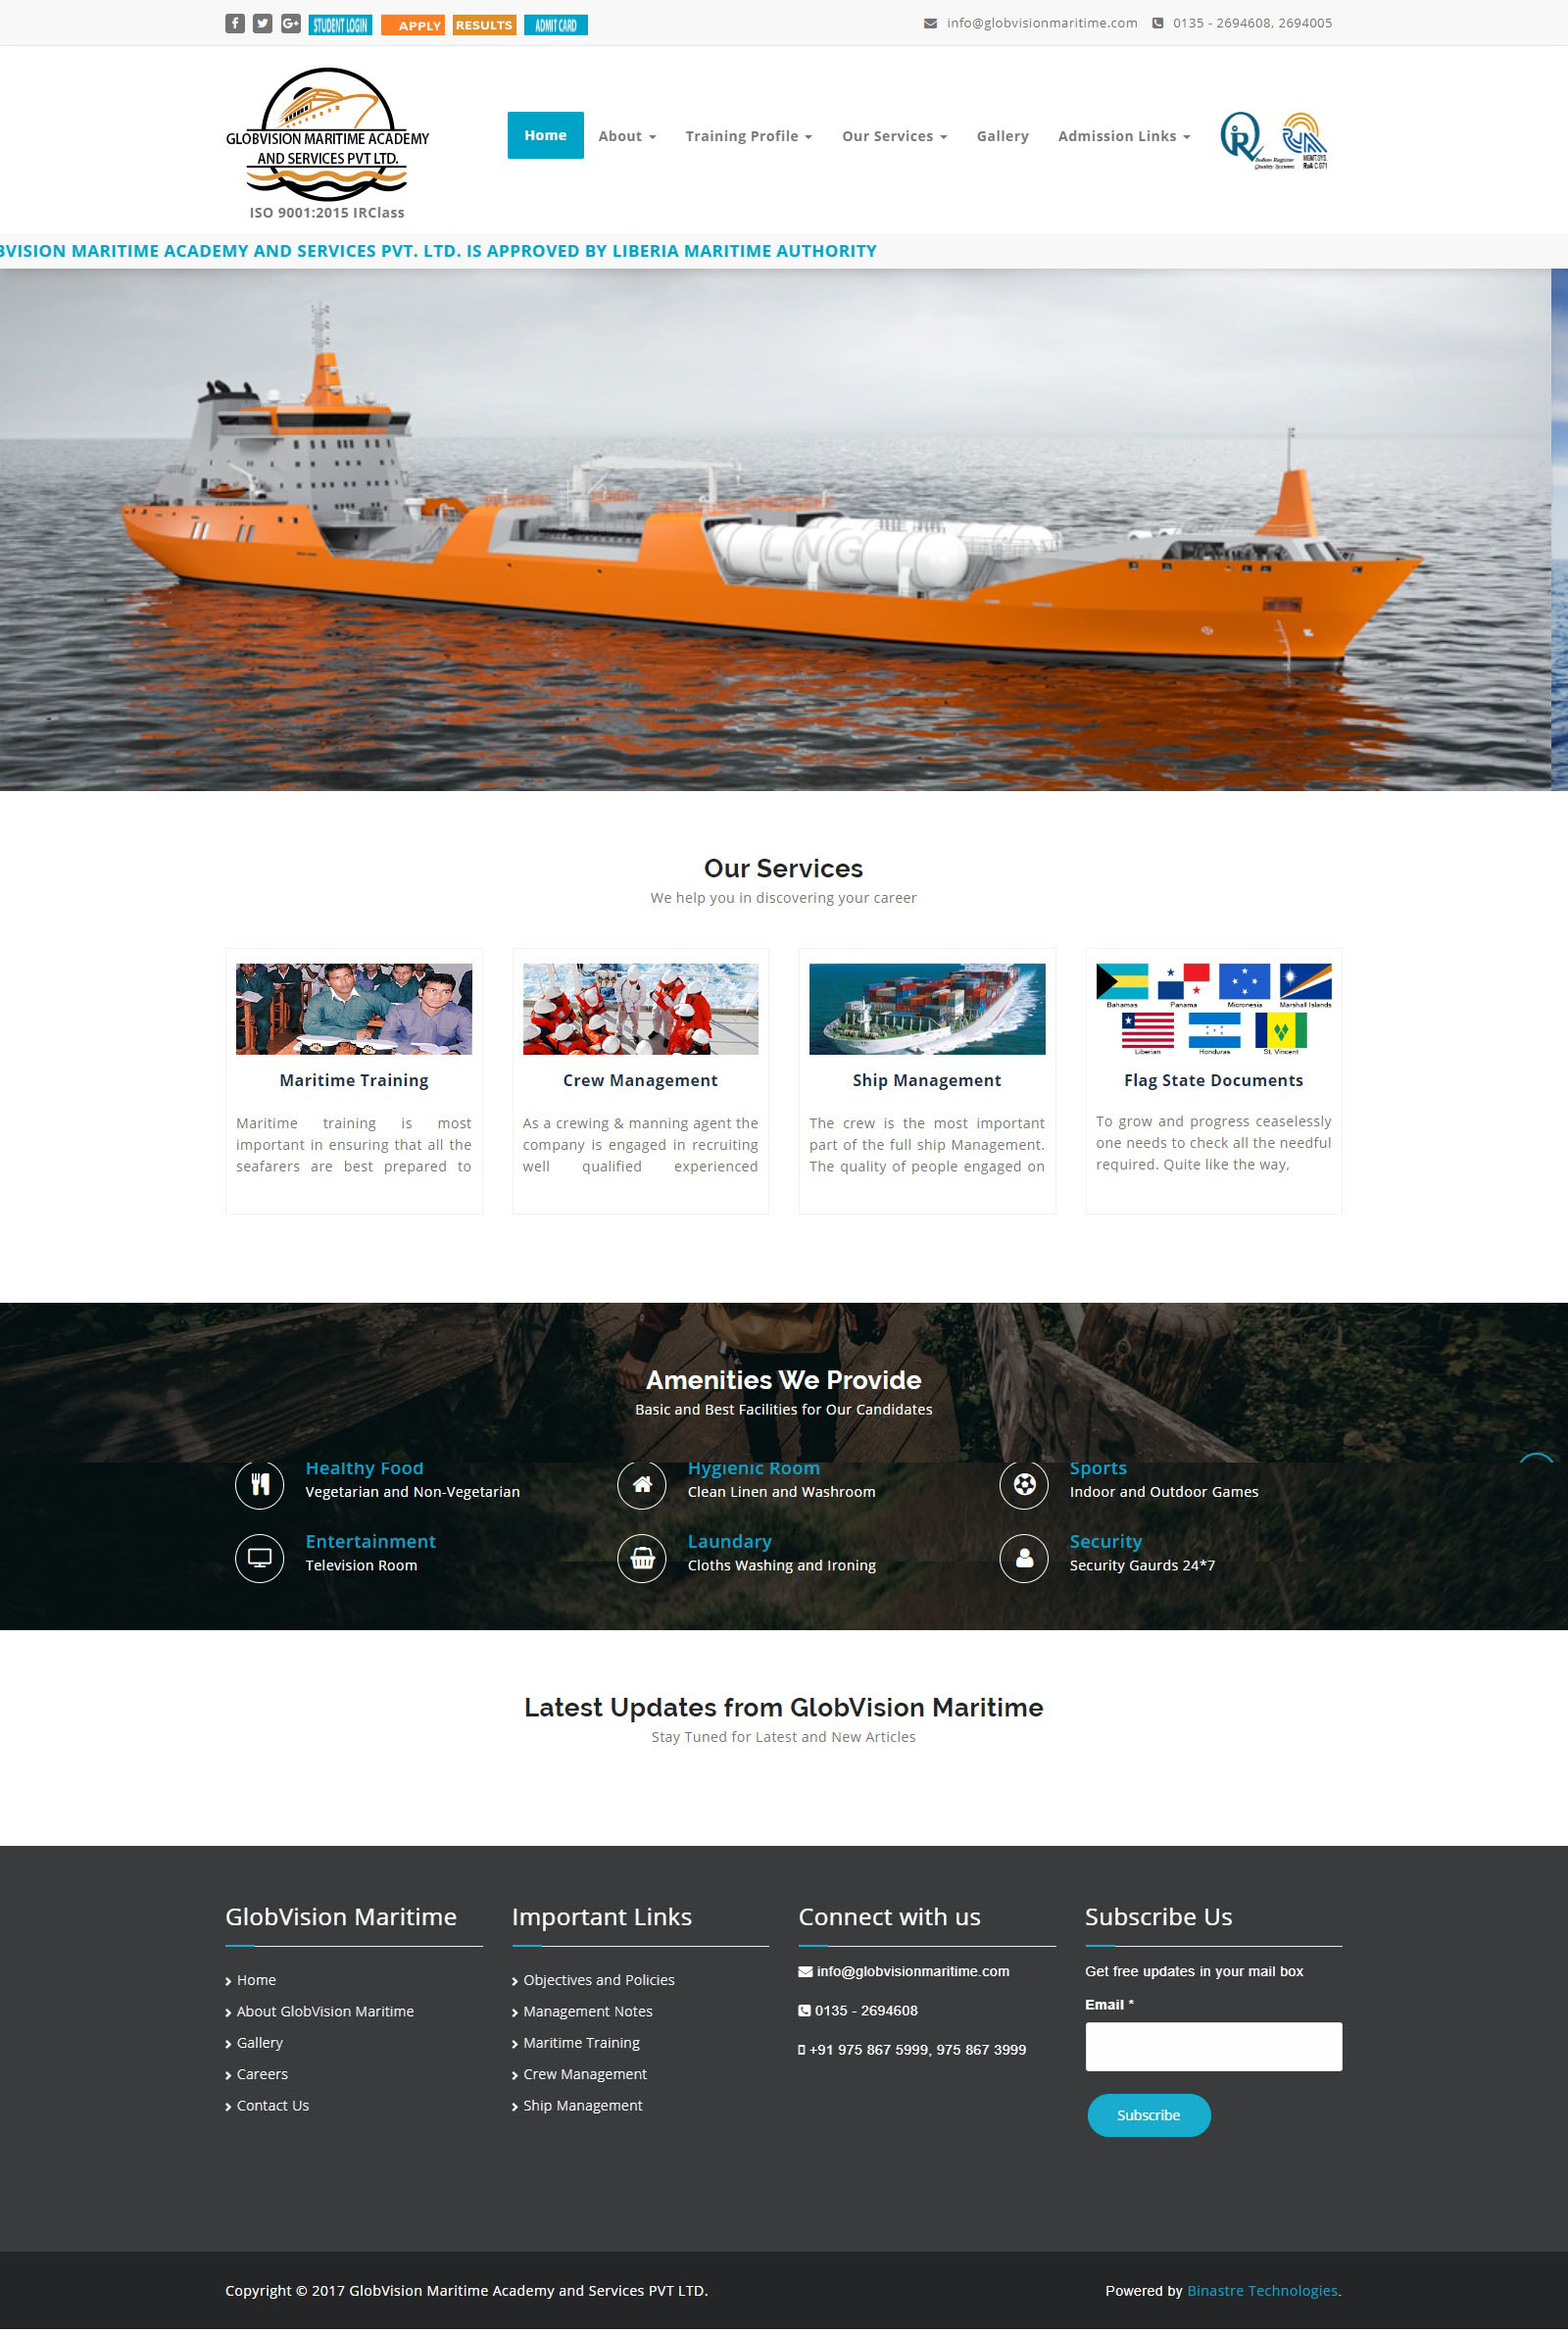 globvision-maritime-academy-and-services-pvt-ltd-homepage